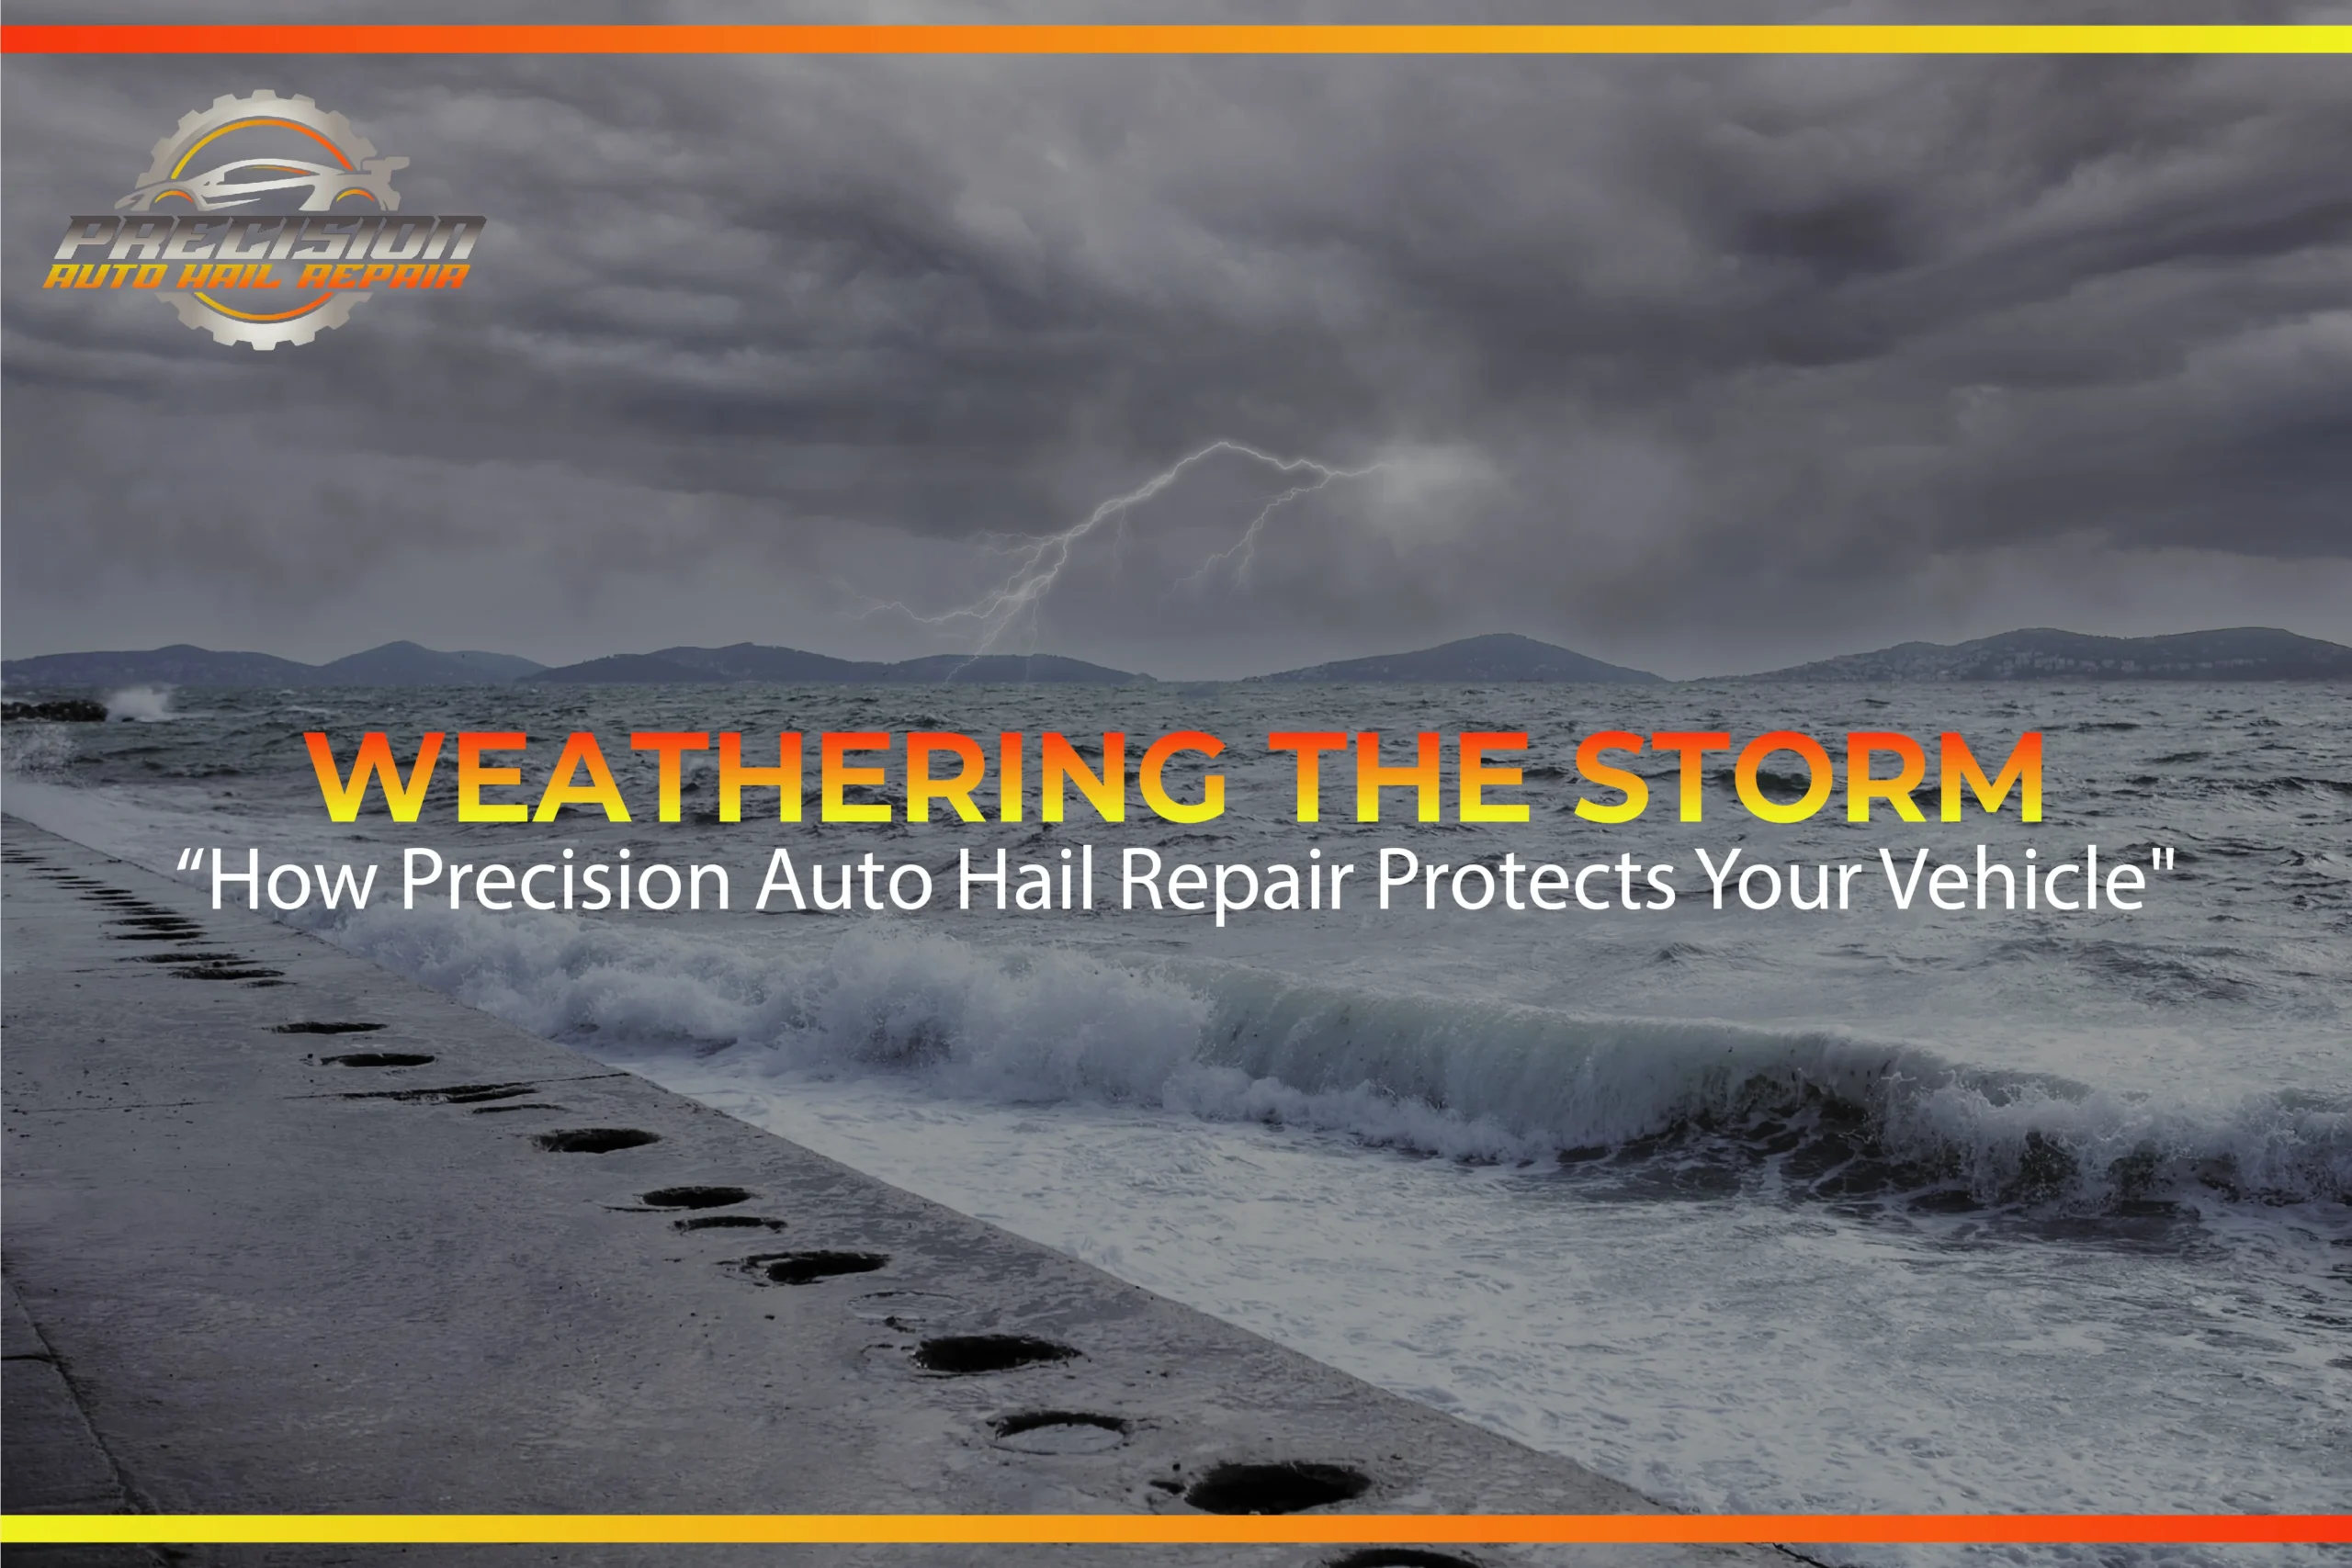 protecting-your-vehicle-weathering-the-storm-with-precision-auto-hail-repair